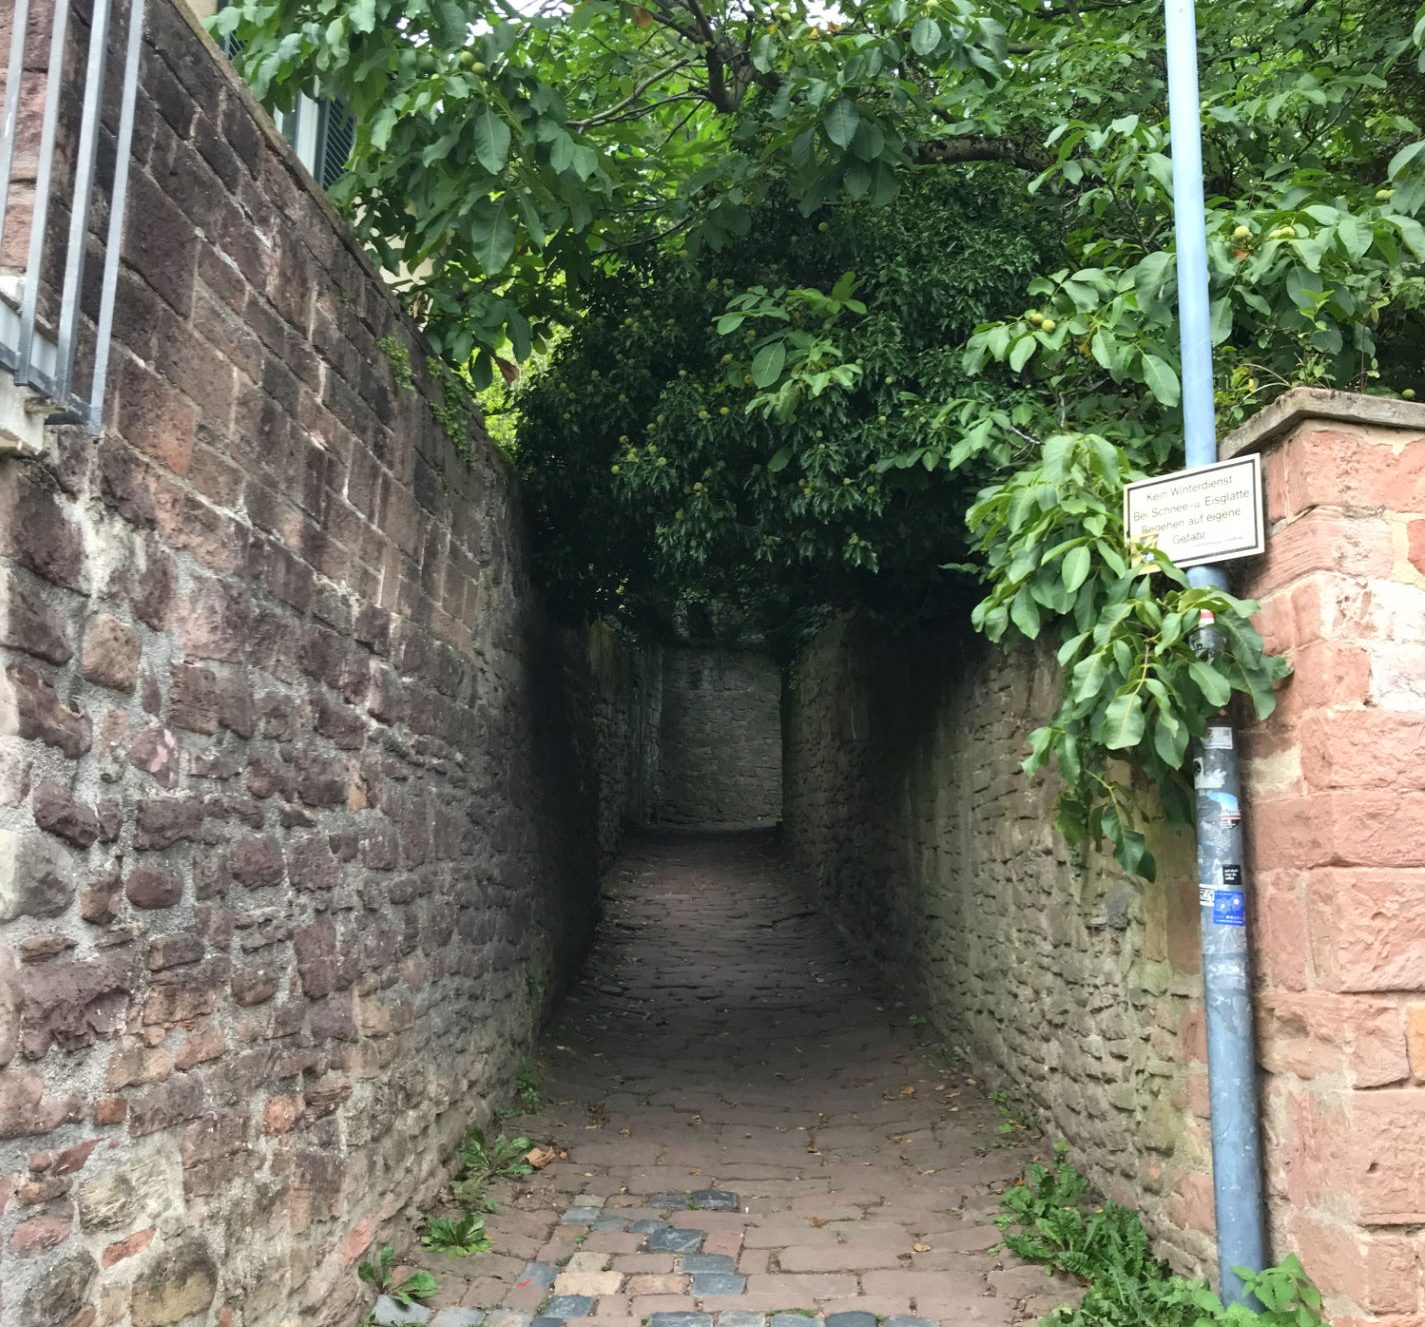 Unmarked entrance to the Philosopher's Path